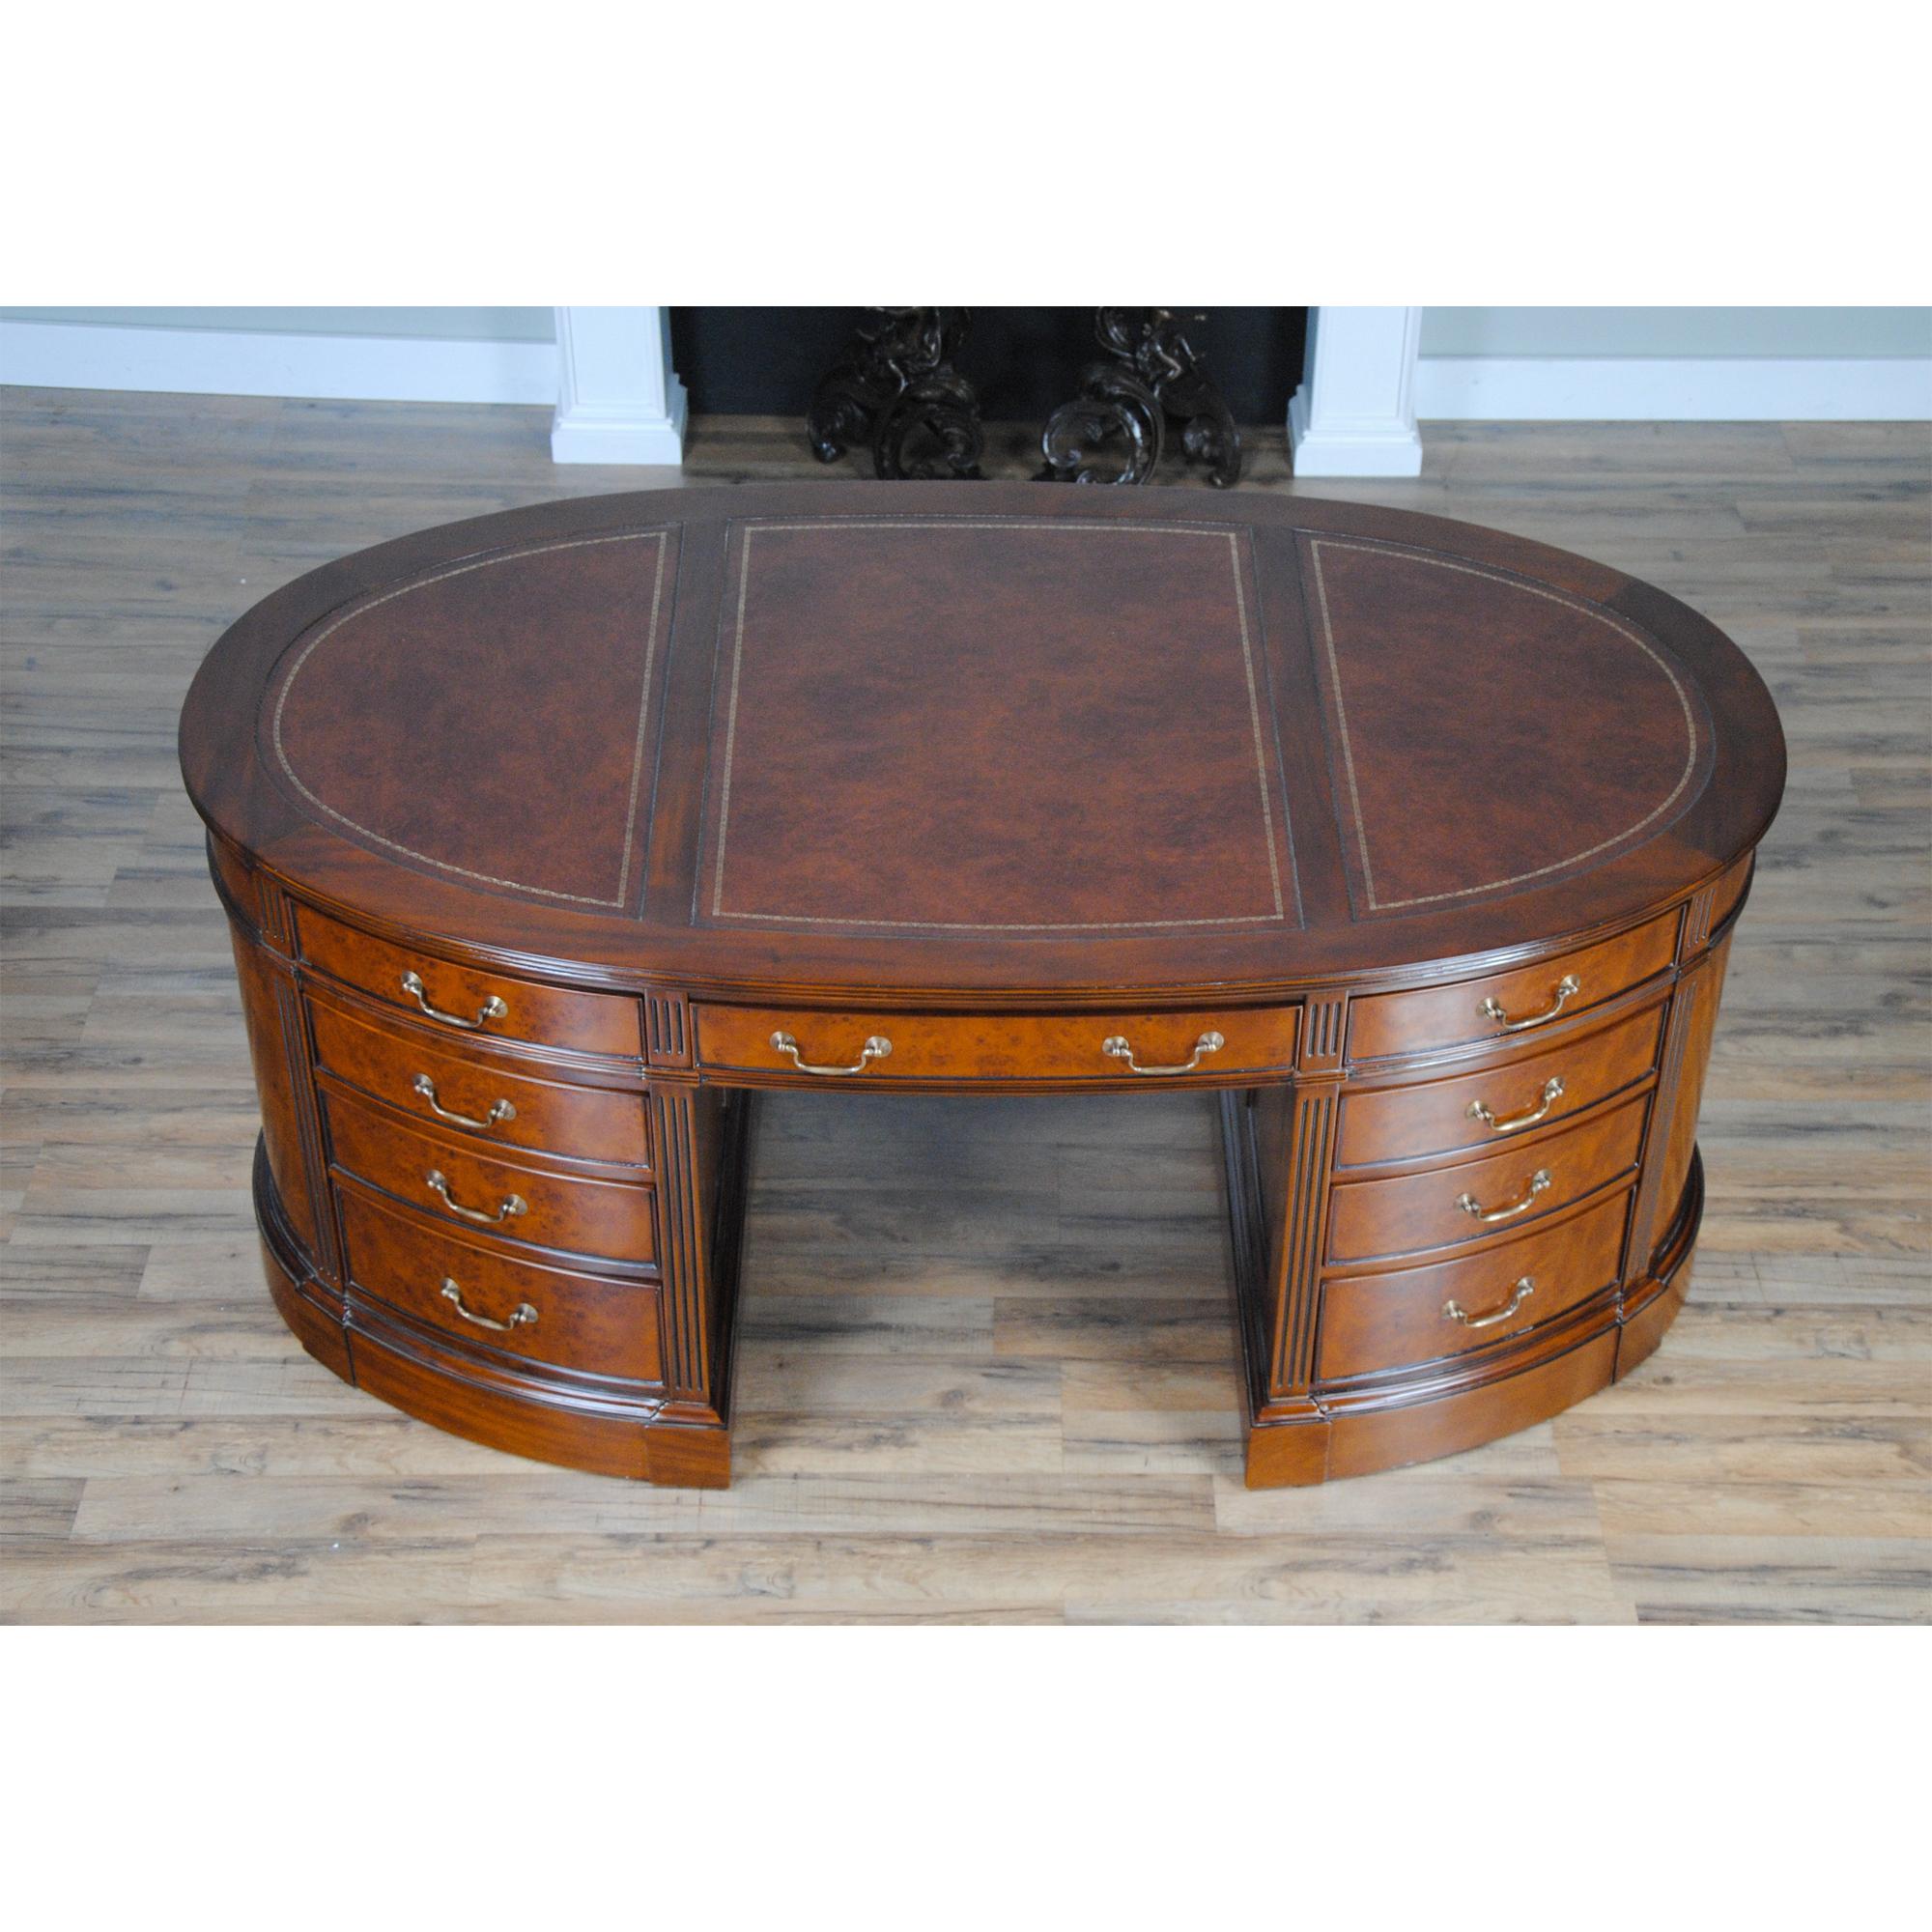 One of the most complicated items that we produce at Niagara furniture our Burled Oval Partners Desk is also one of the most popular. The top section of the desk consists of a three-paneled writing surfaces of brown full grain genuine leather which